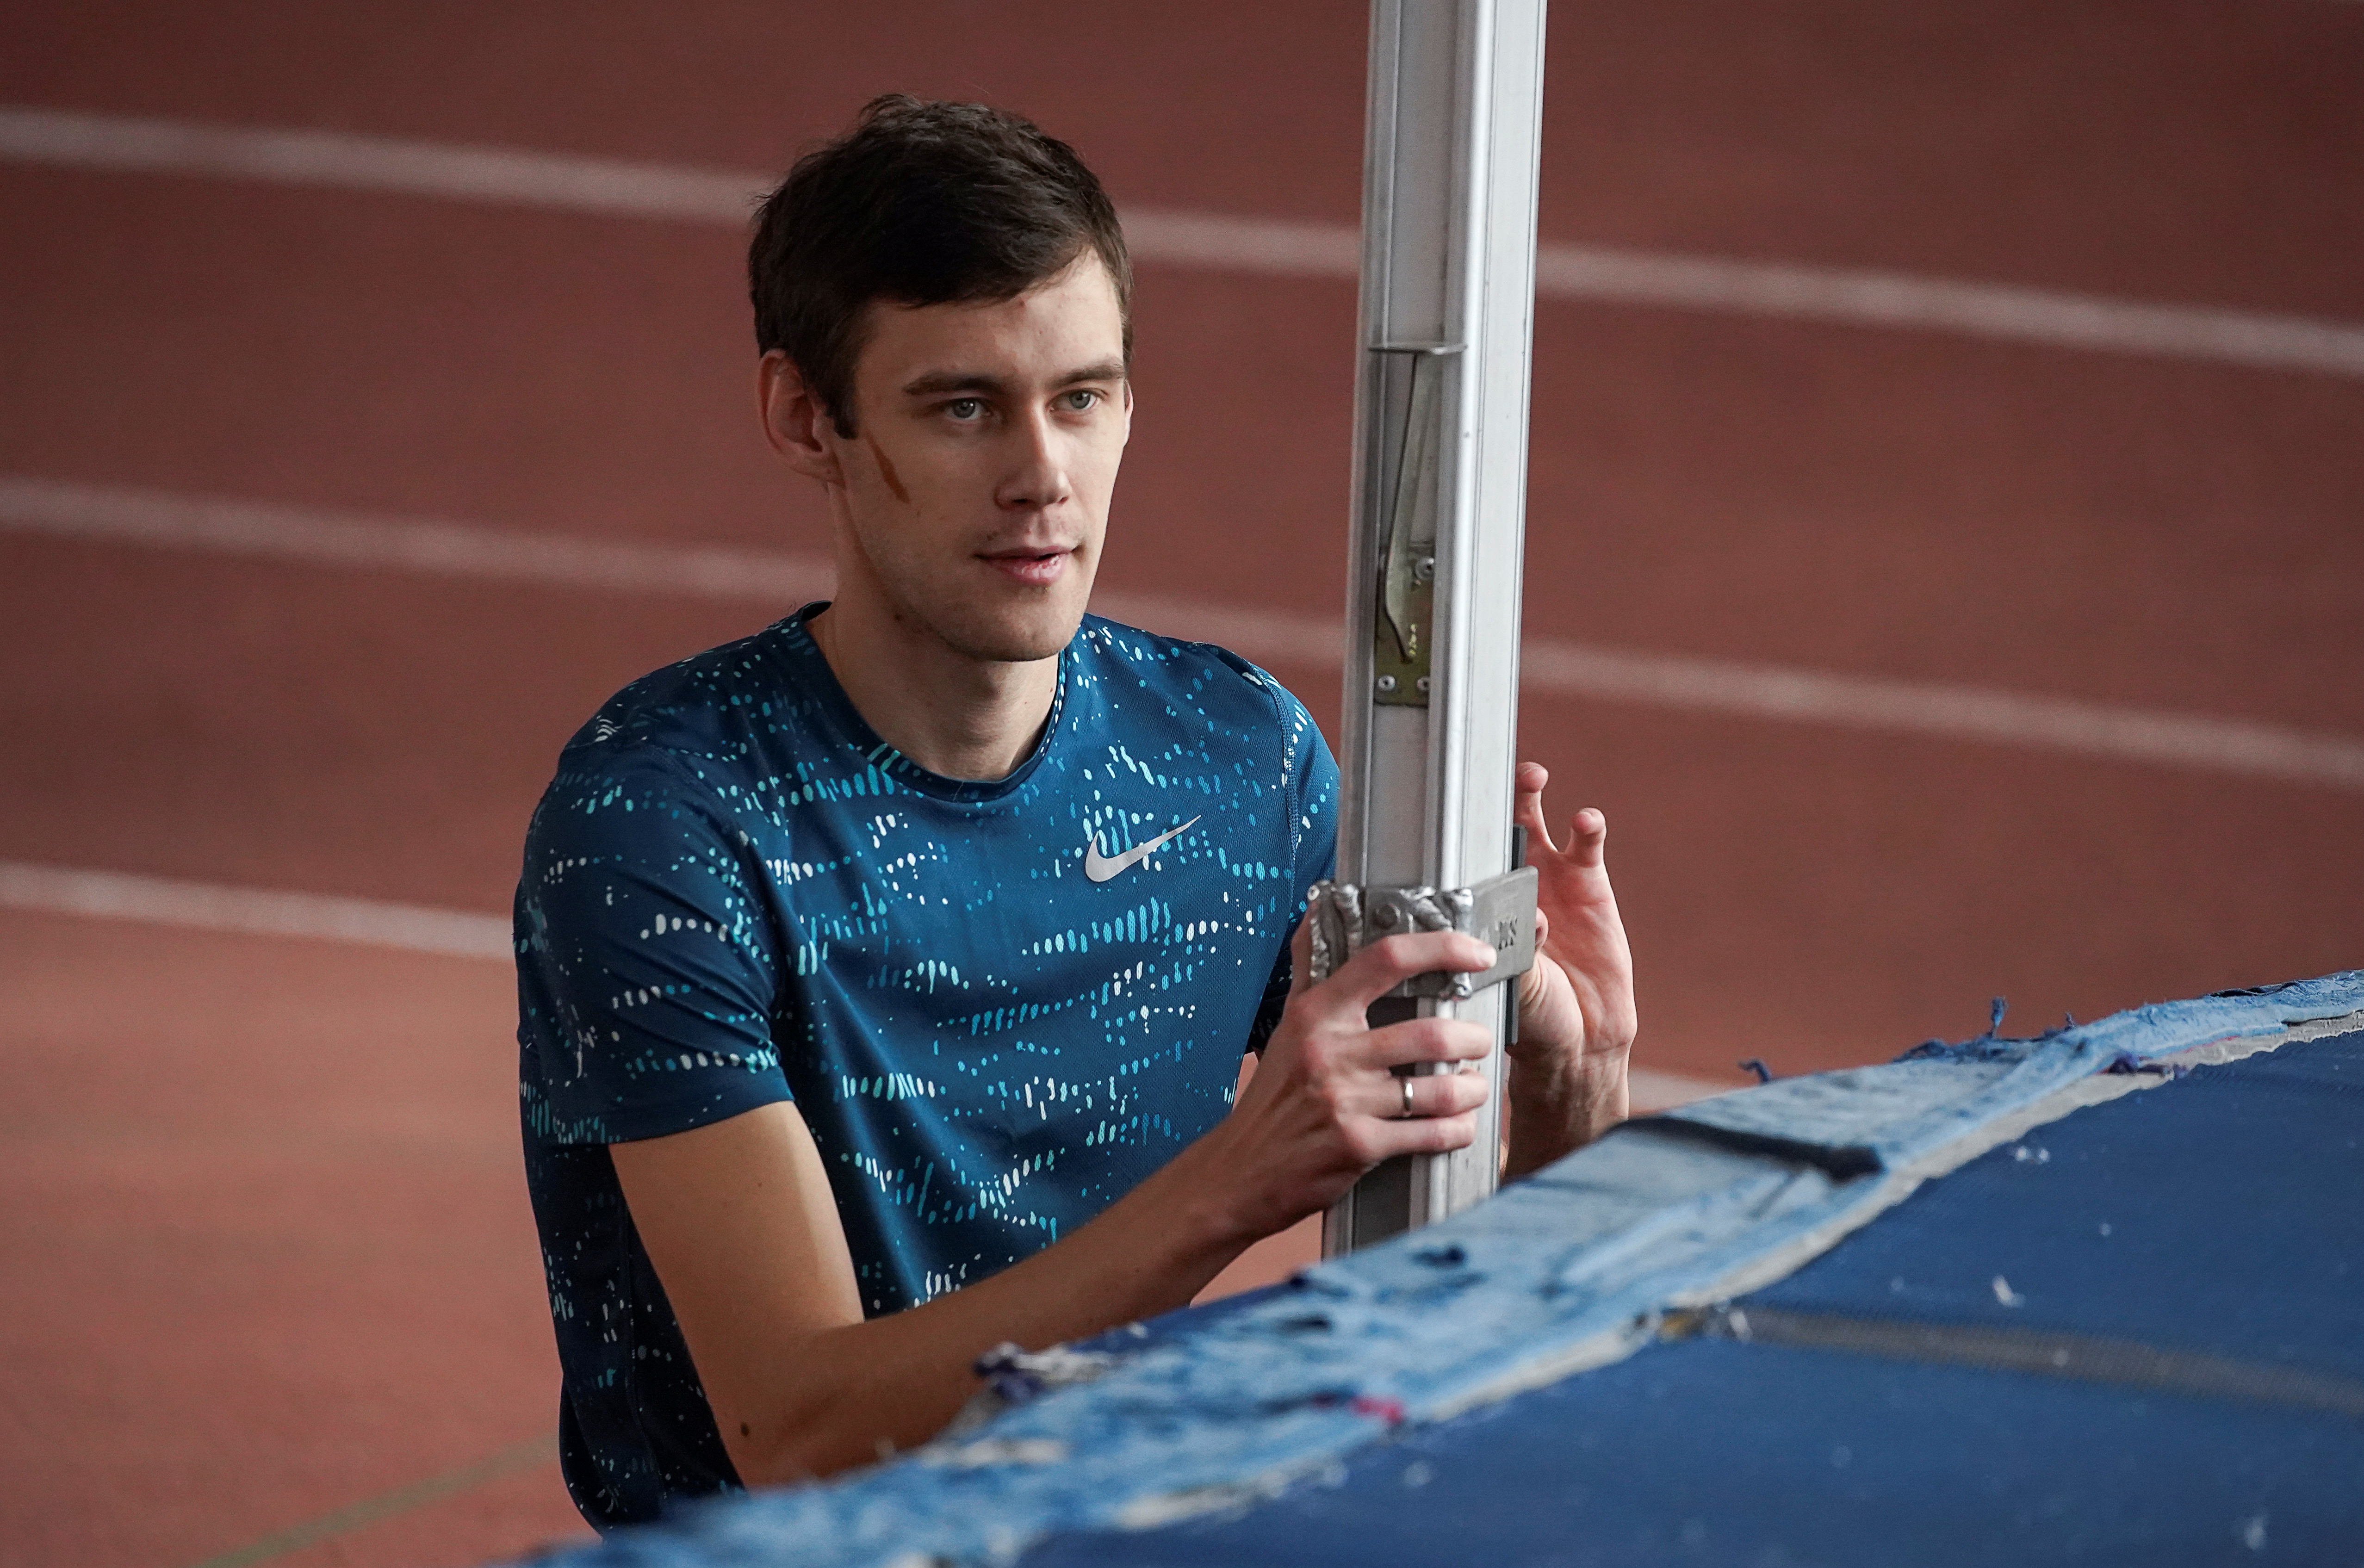 Russian high jumper Danil Lysenko attends a training session in Moscow